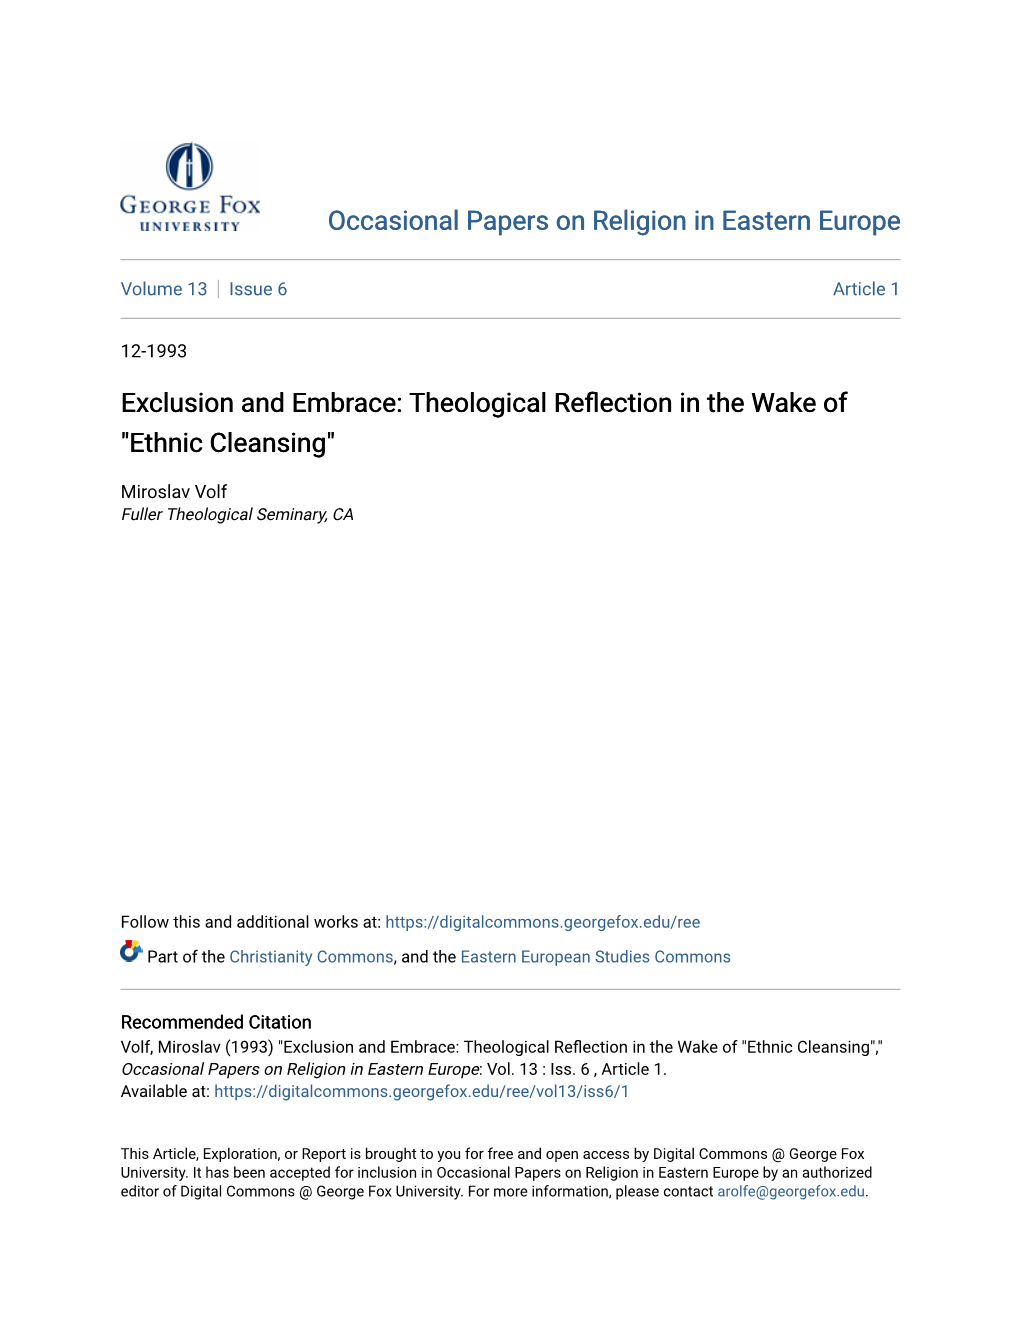 Exclusion and Embrace: Theological Reflection in the Akw E of "Ethnic Cleansing"